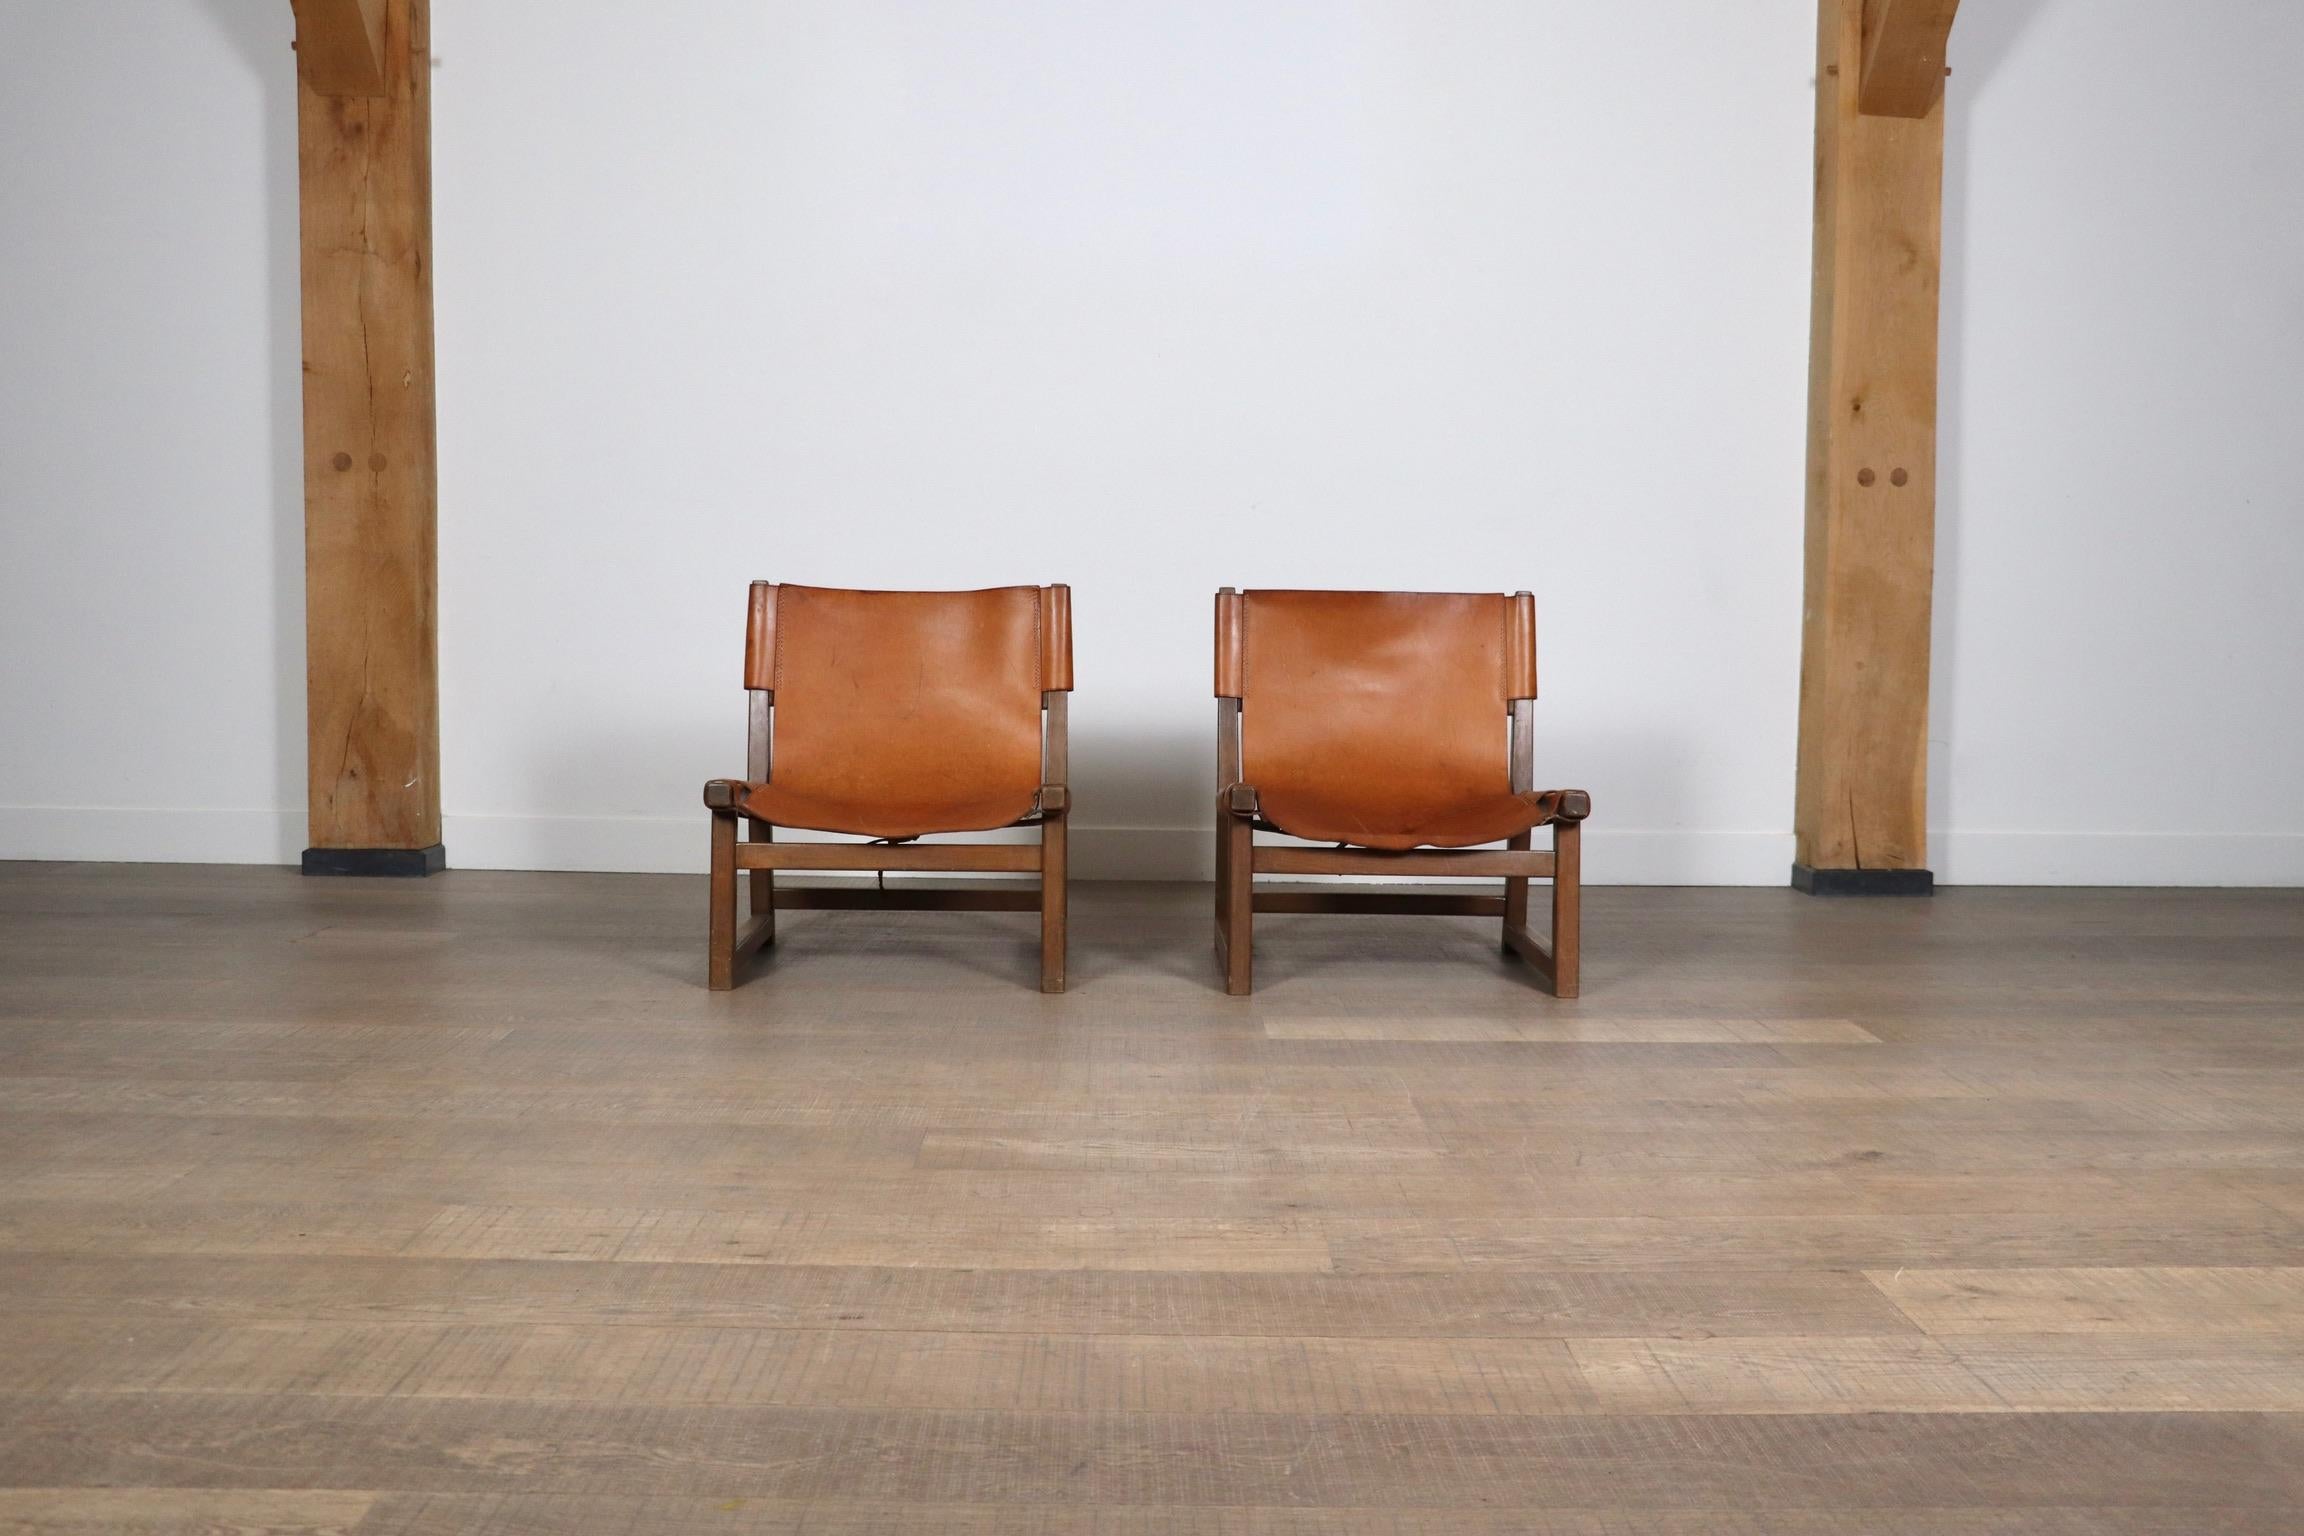 Fantastic pair of Riaza chairs in cognac leather by Paco Muñoz for Darro Gallery, Spain, 1960s.
Drawing inspiration from hunting chair aesthetics, the cognac leather upholstery, loosely attached to the frame with straps, adds a touch of rustic charm